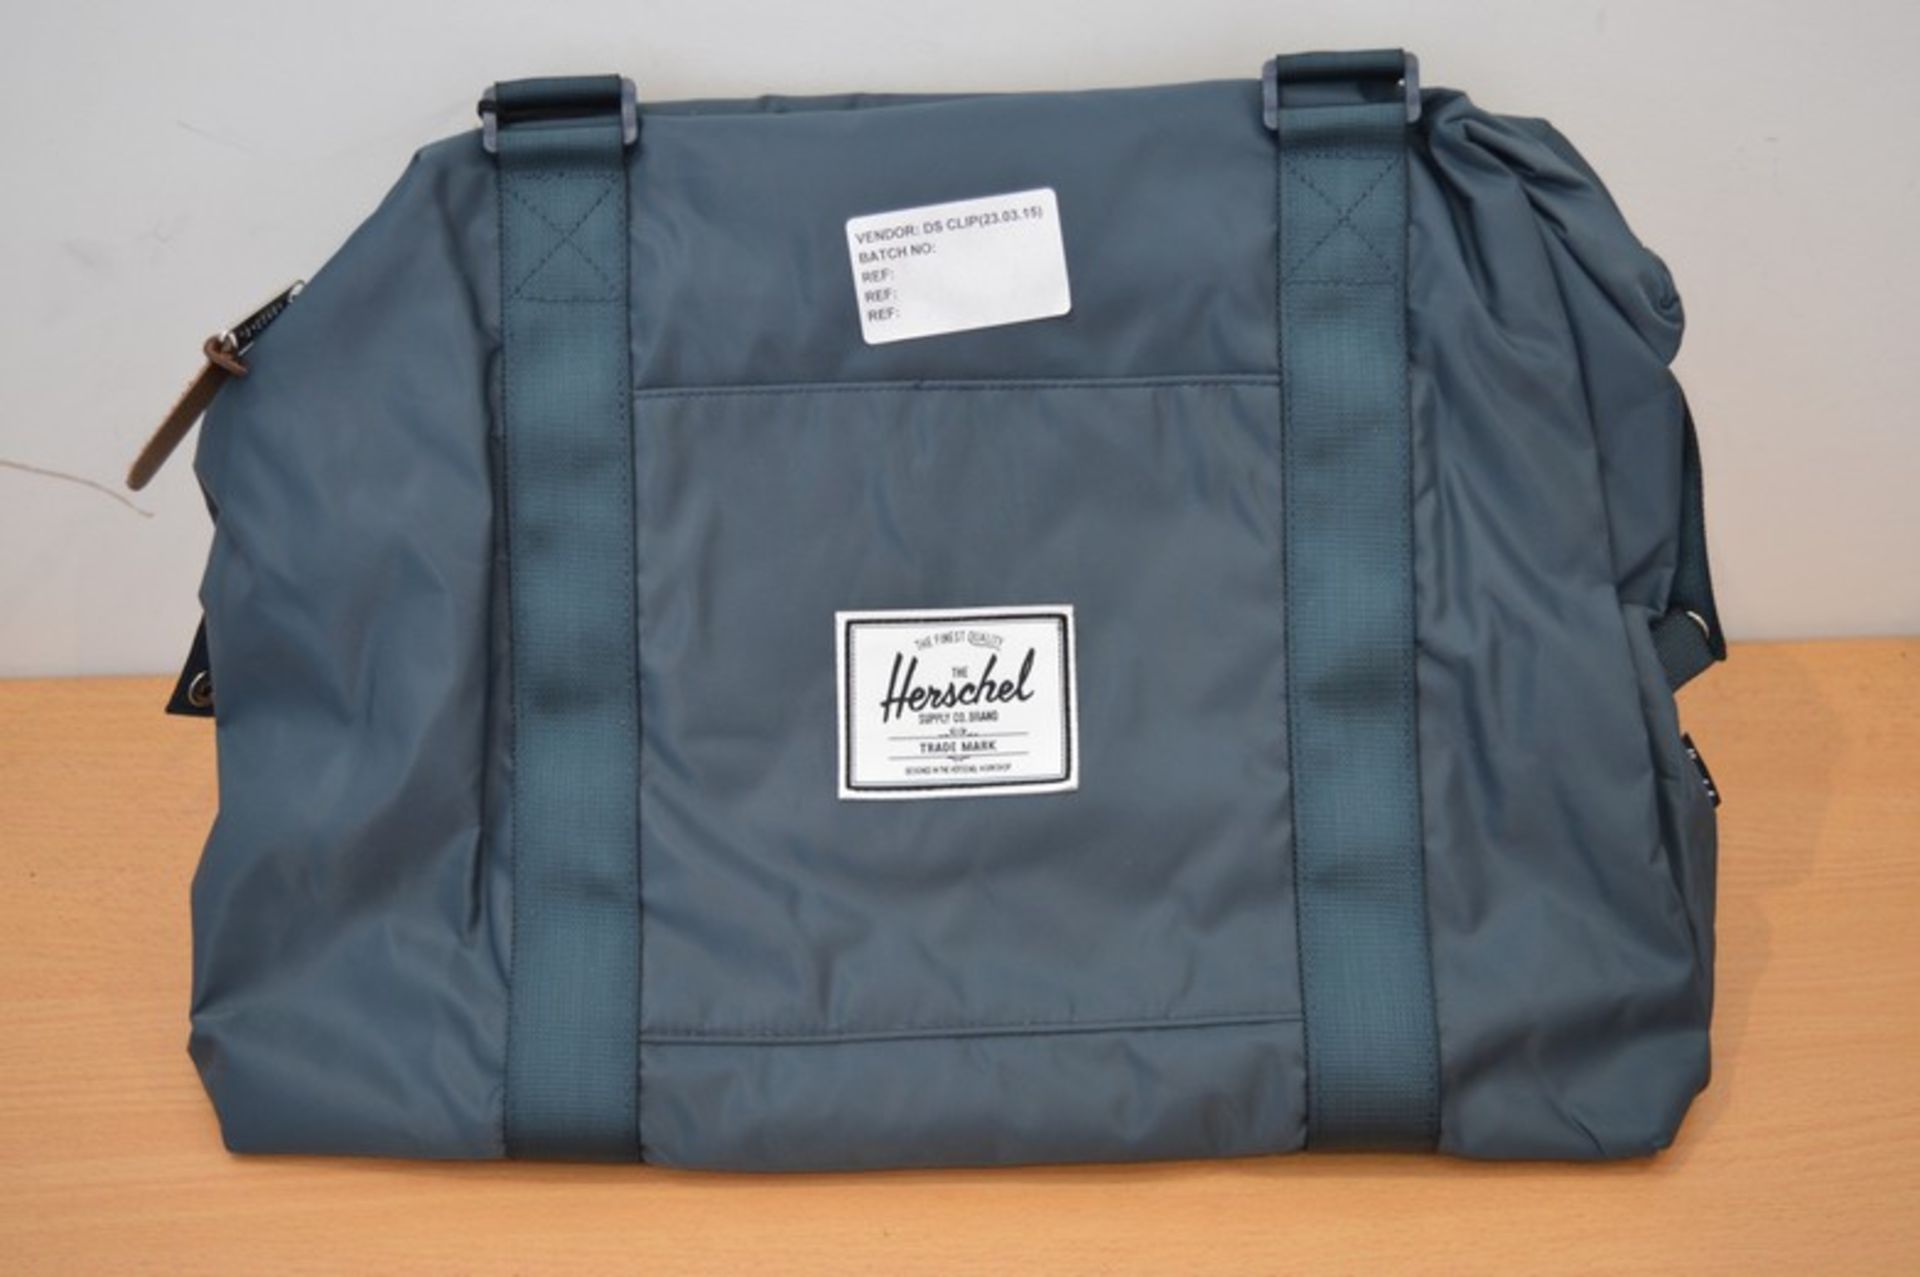 BRAND NEW WITH LABELS HERSCHEL SUPPLE.CO BLUE WATERFPROOF CARRY ALL RRP £75 (DSCLIP)(23.03.15)